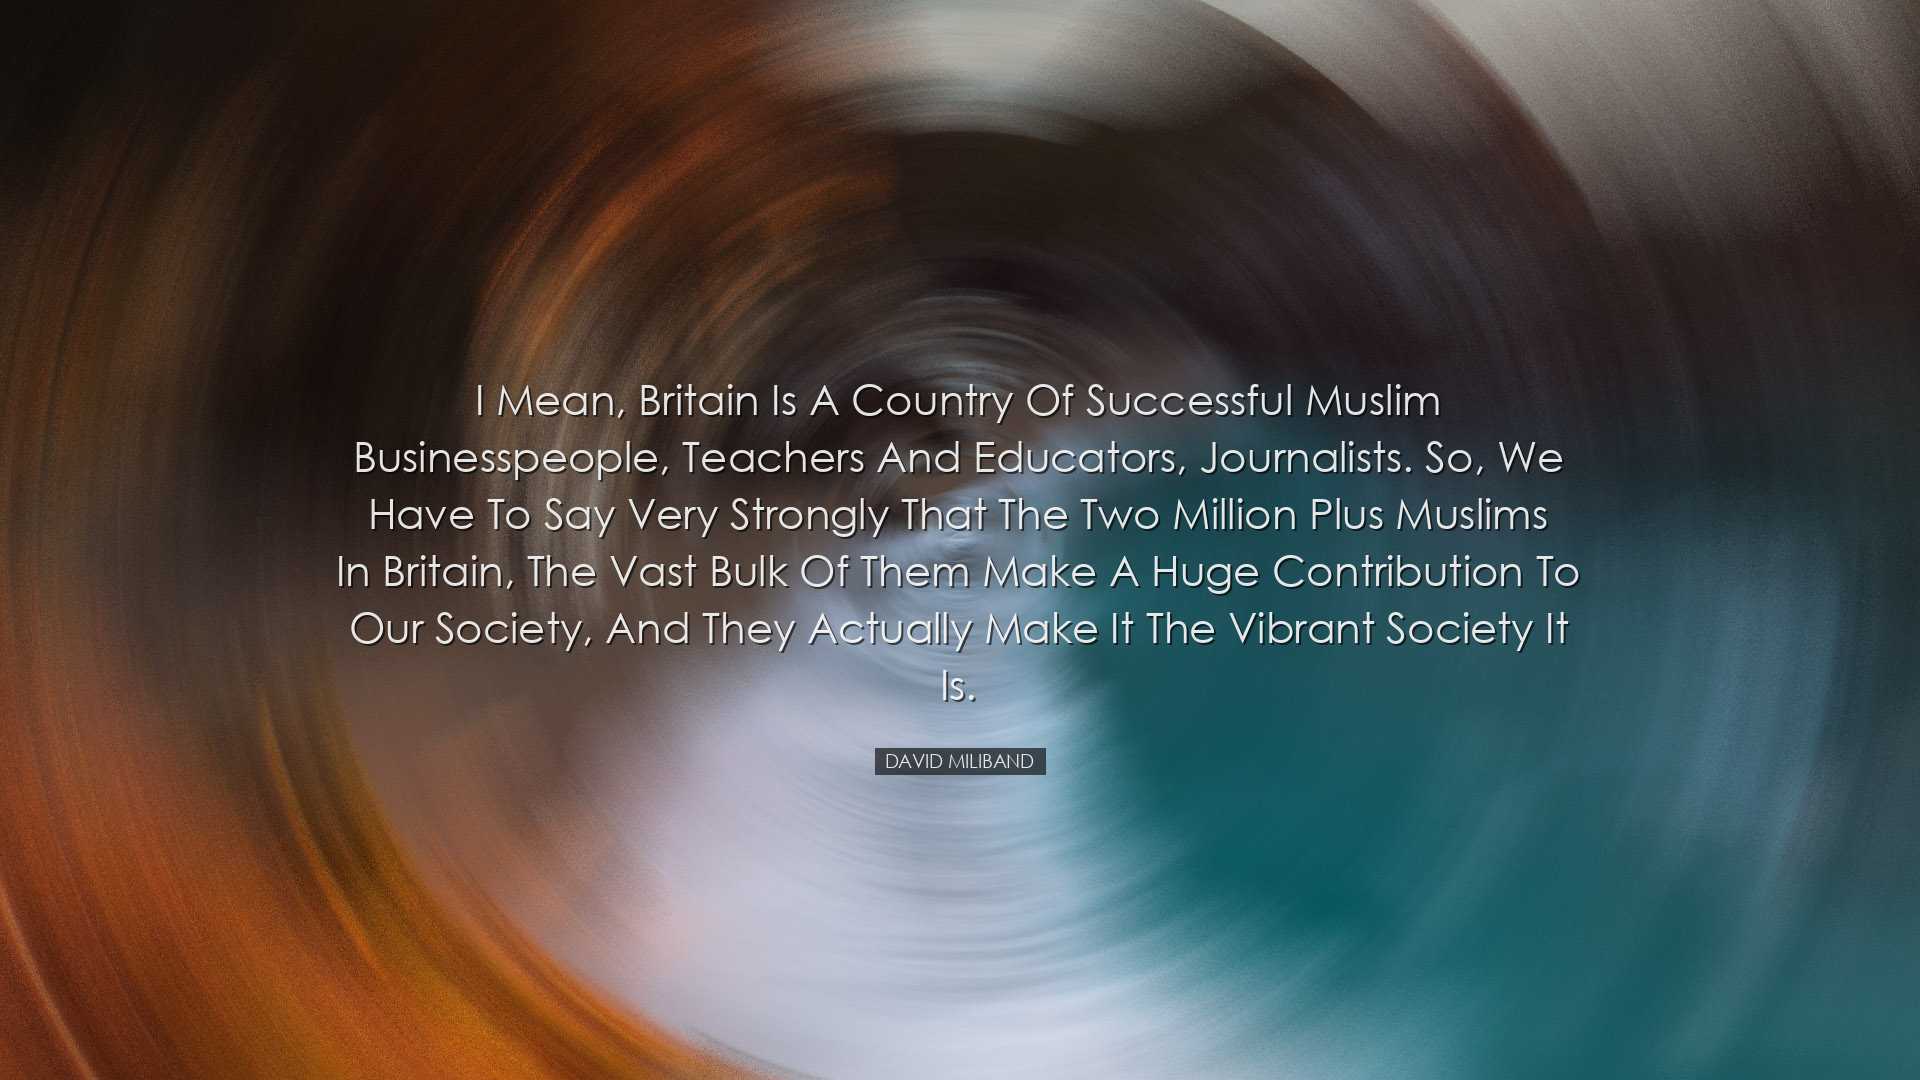 I mean, Britain is a country of successful Muslim businesspeople,